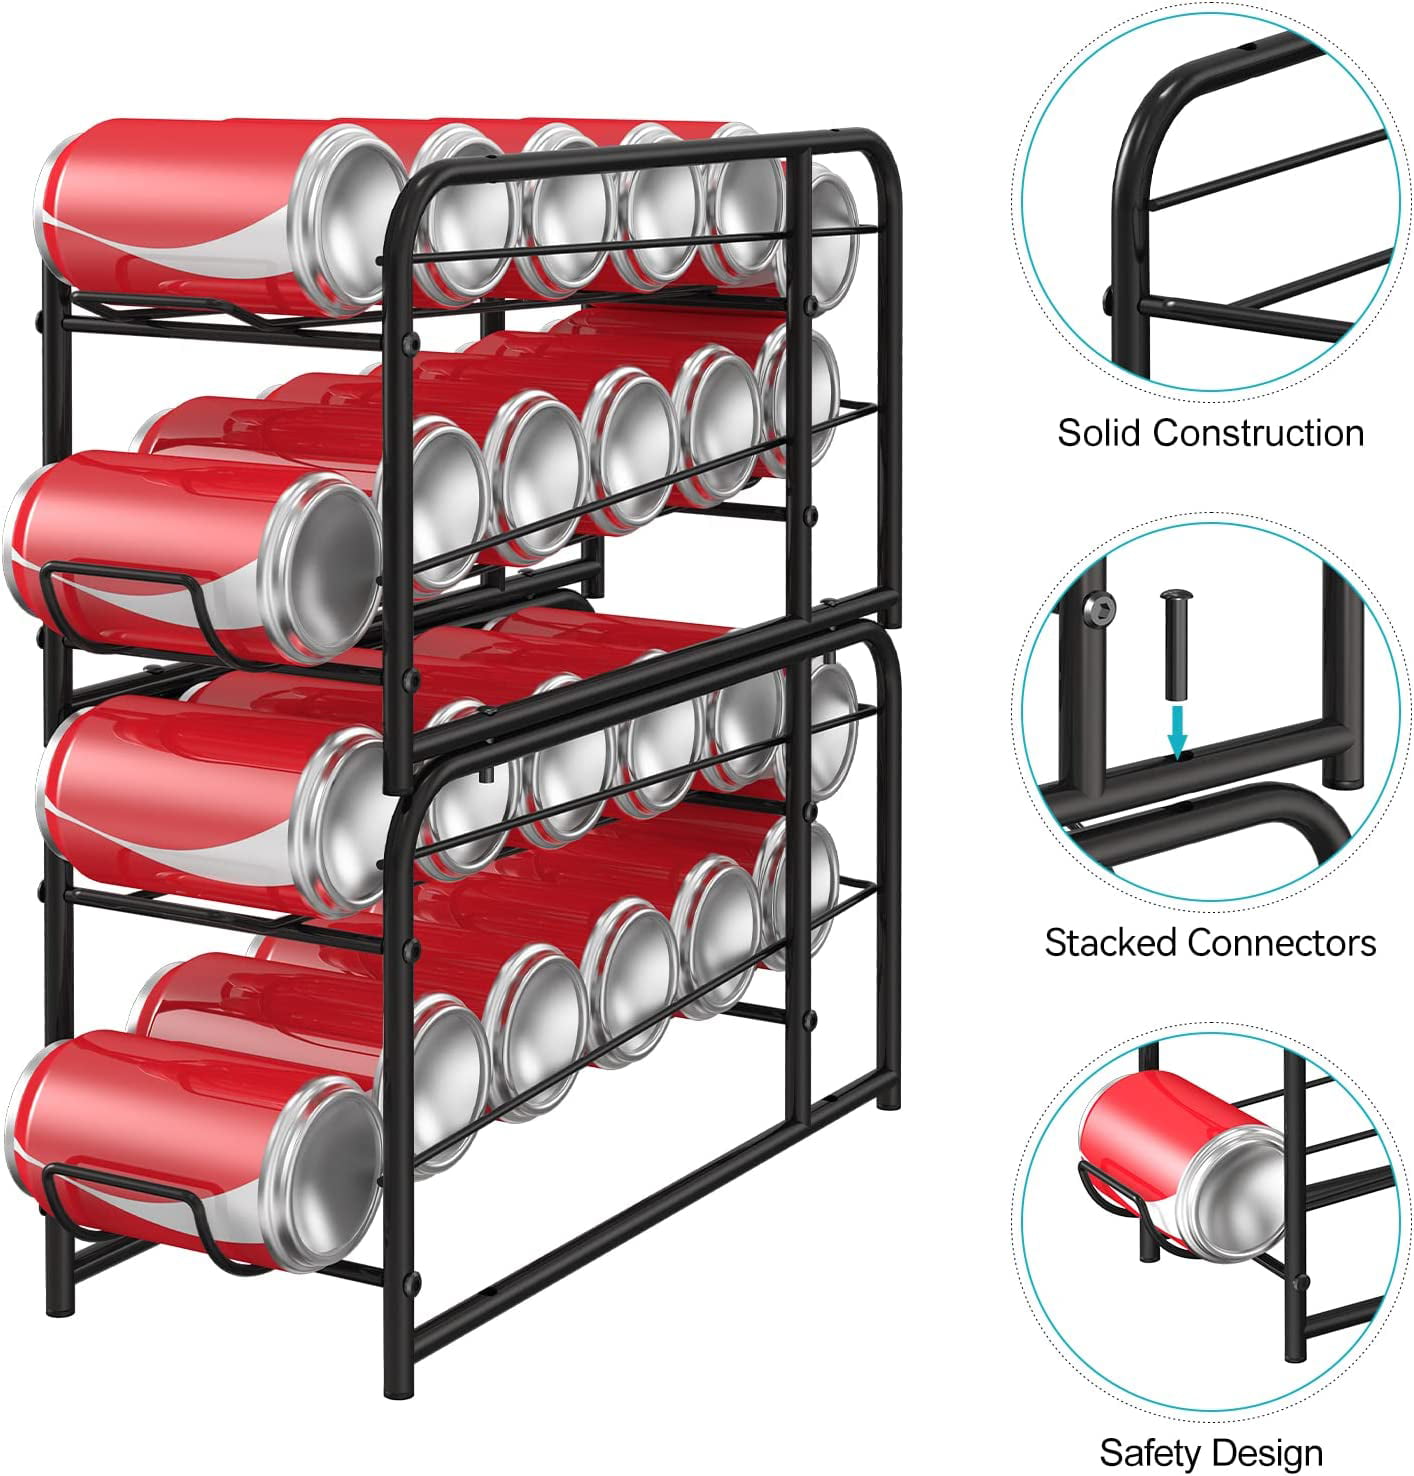 Sulishang 4 Tiers Stackable Can Rack Organizer, Wear-resistant Upgrade Beverage Food Can Dispenser Holder Holds Up to 48 Cans for Kitchen Cabinet and